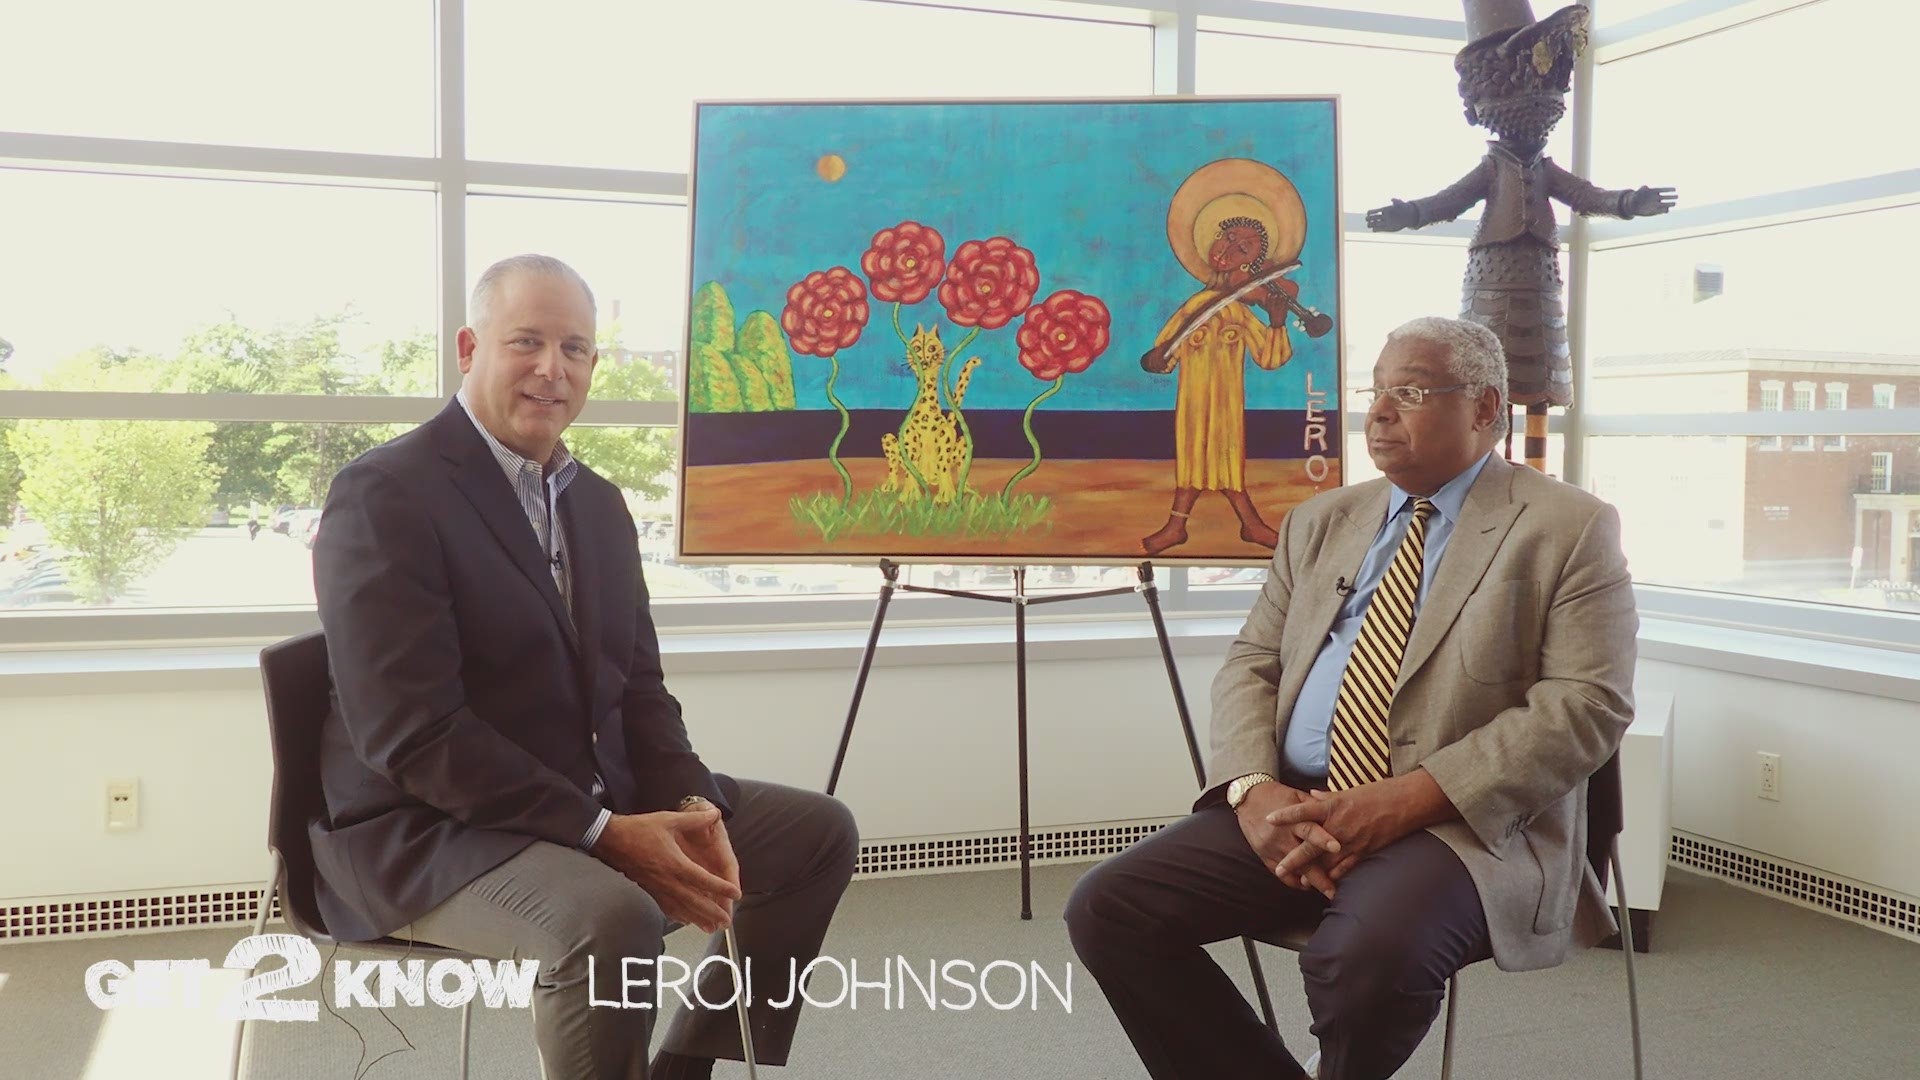 Scott Levin introduces you to Buffalo icon LeRoi Johnson. Manager to  his brother, the late Rick James, lawyer and world renowned artist. Get 2 Know this fascinating